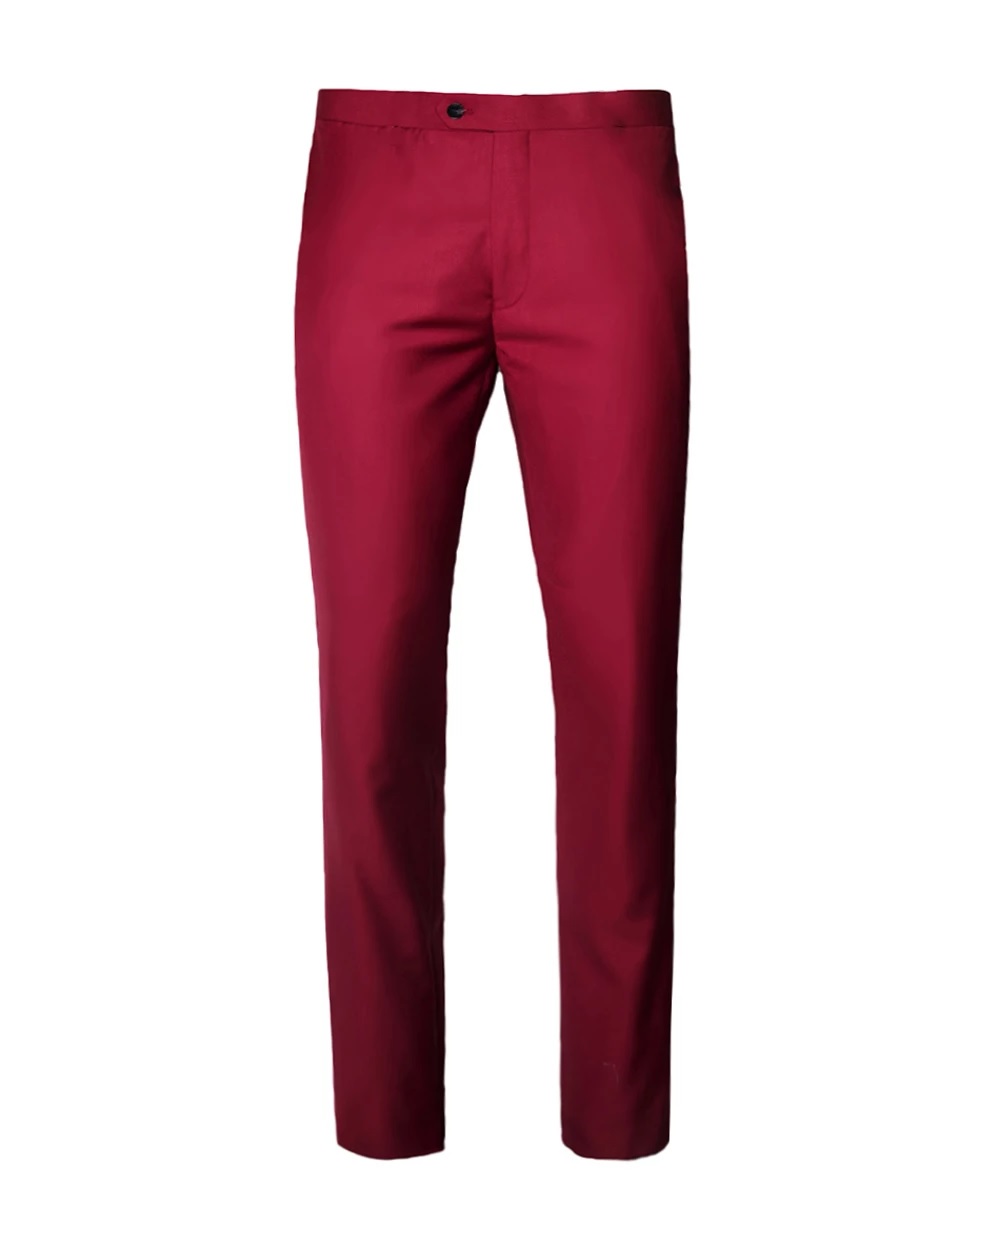 Southern Gents Single Breasted Crimson Suit - Flawless Crowns